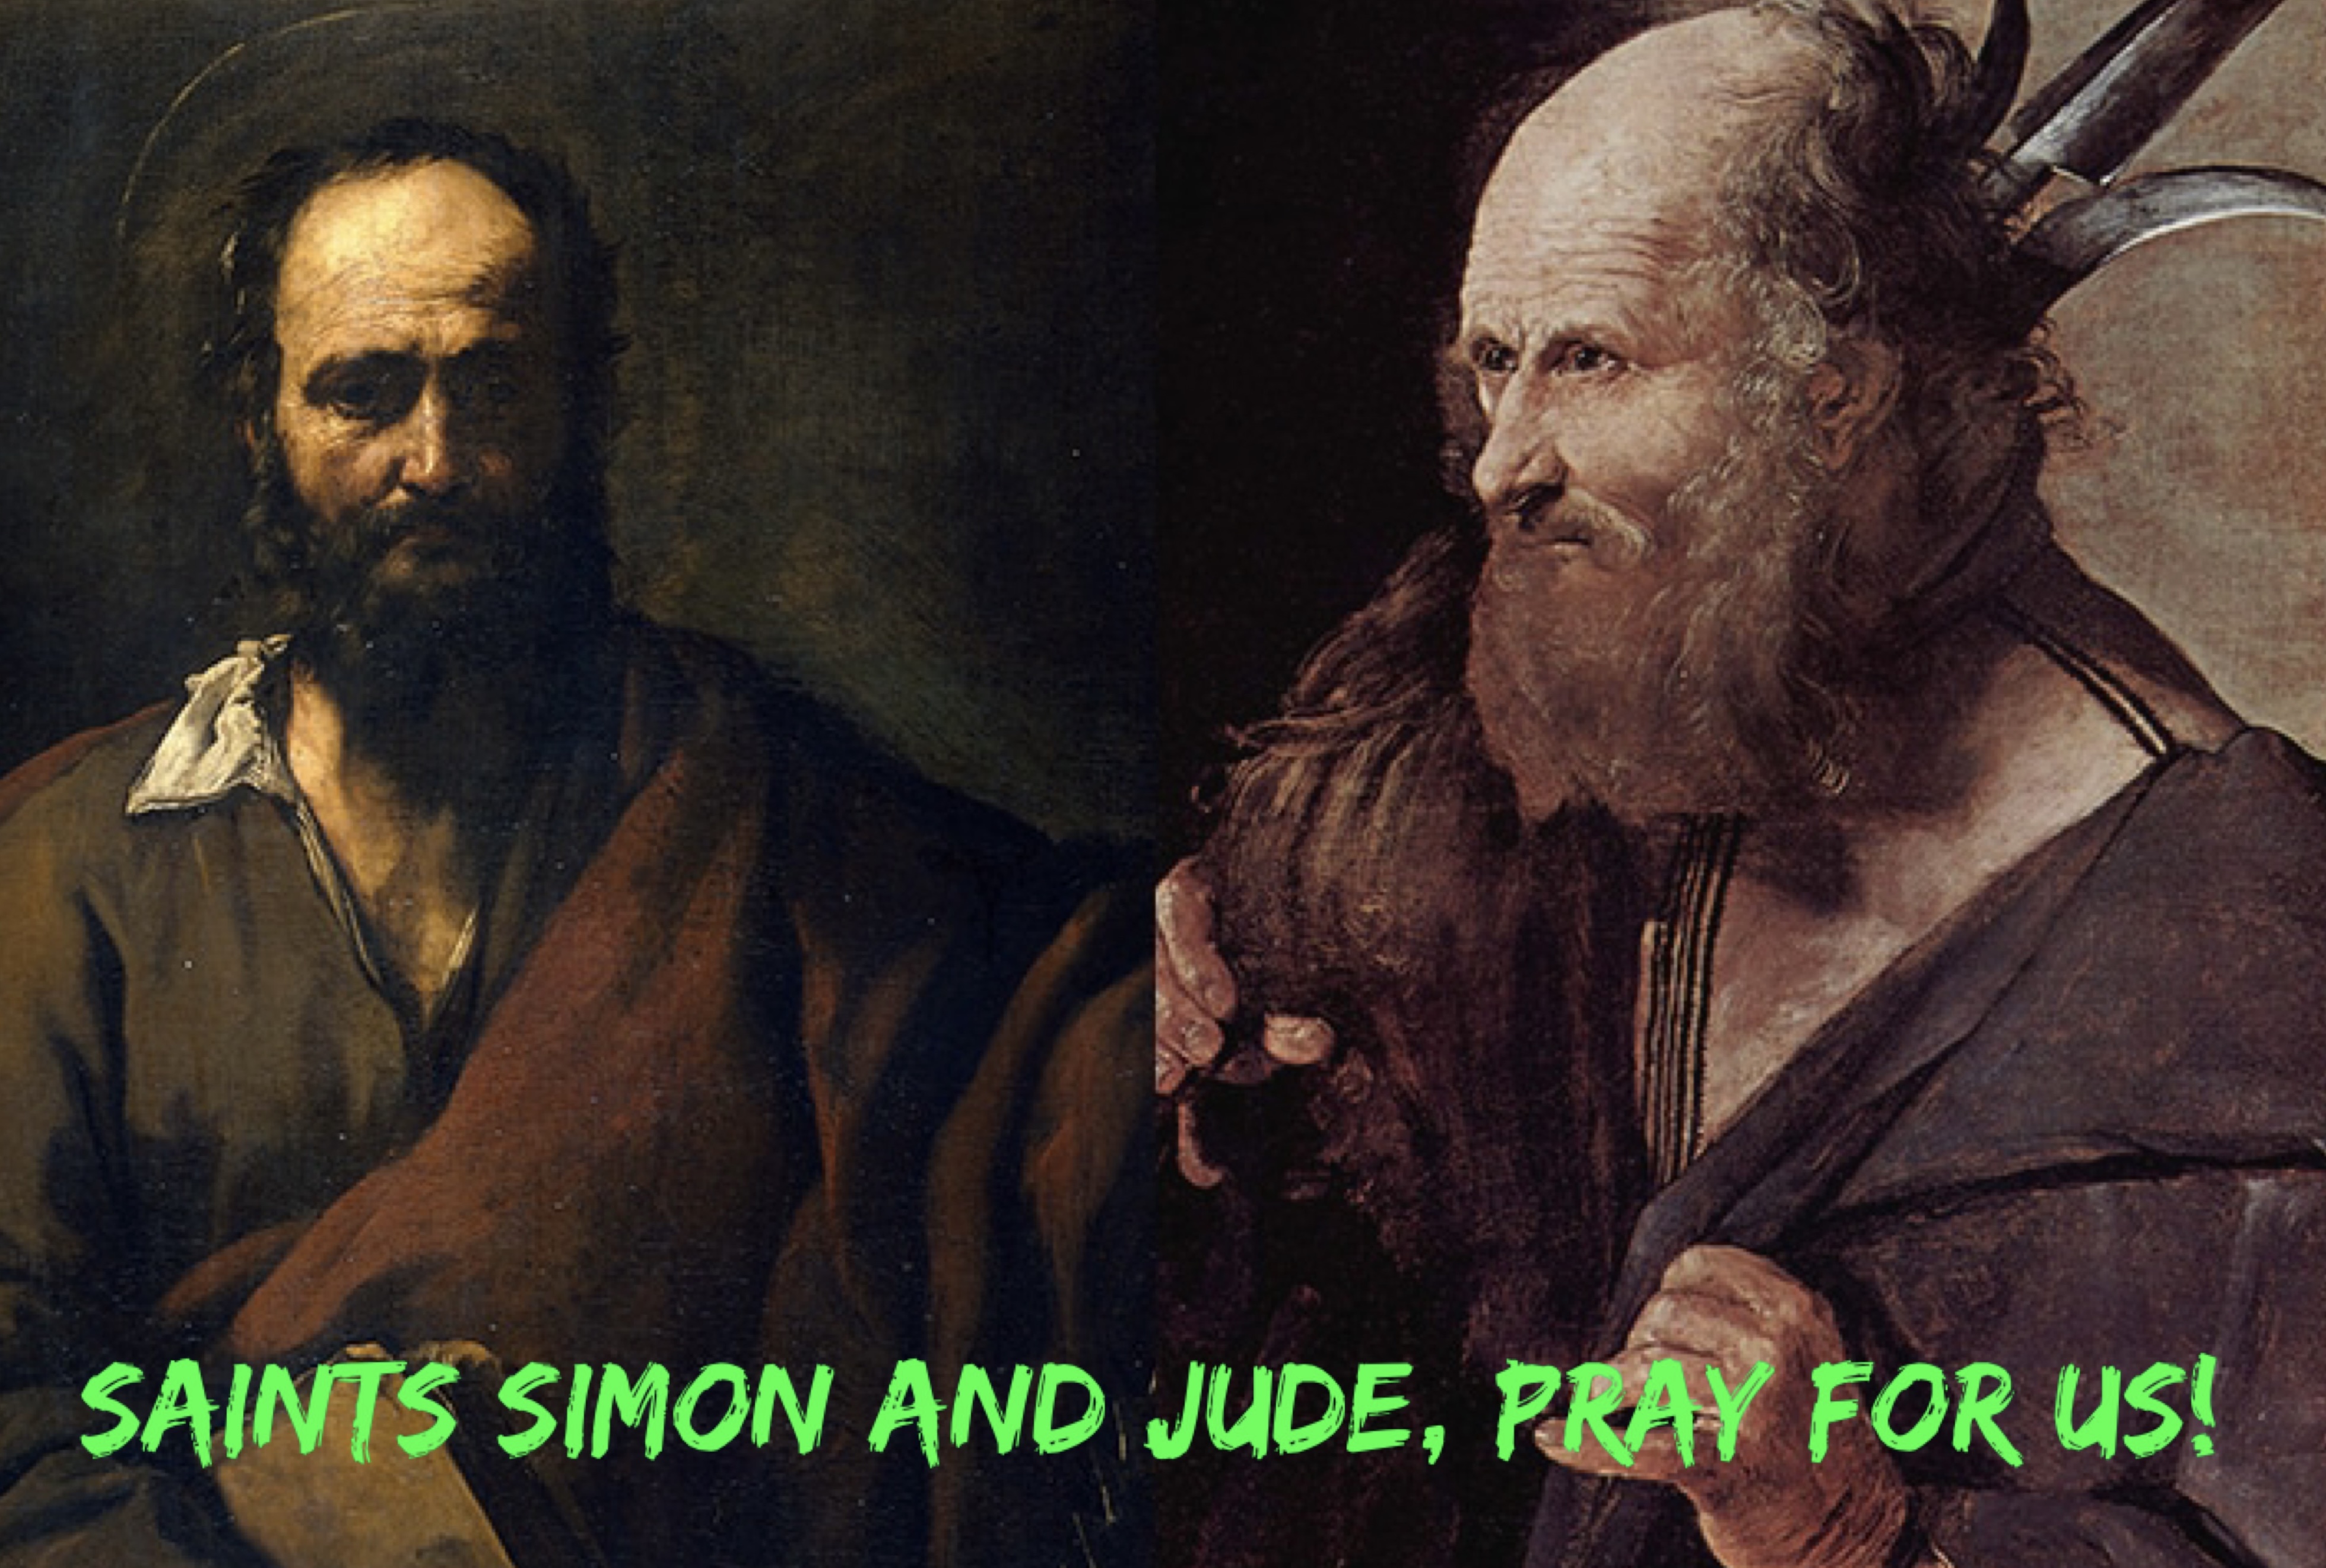 28th October – Saints Simon and Jude